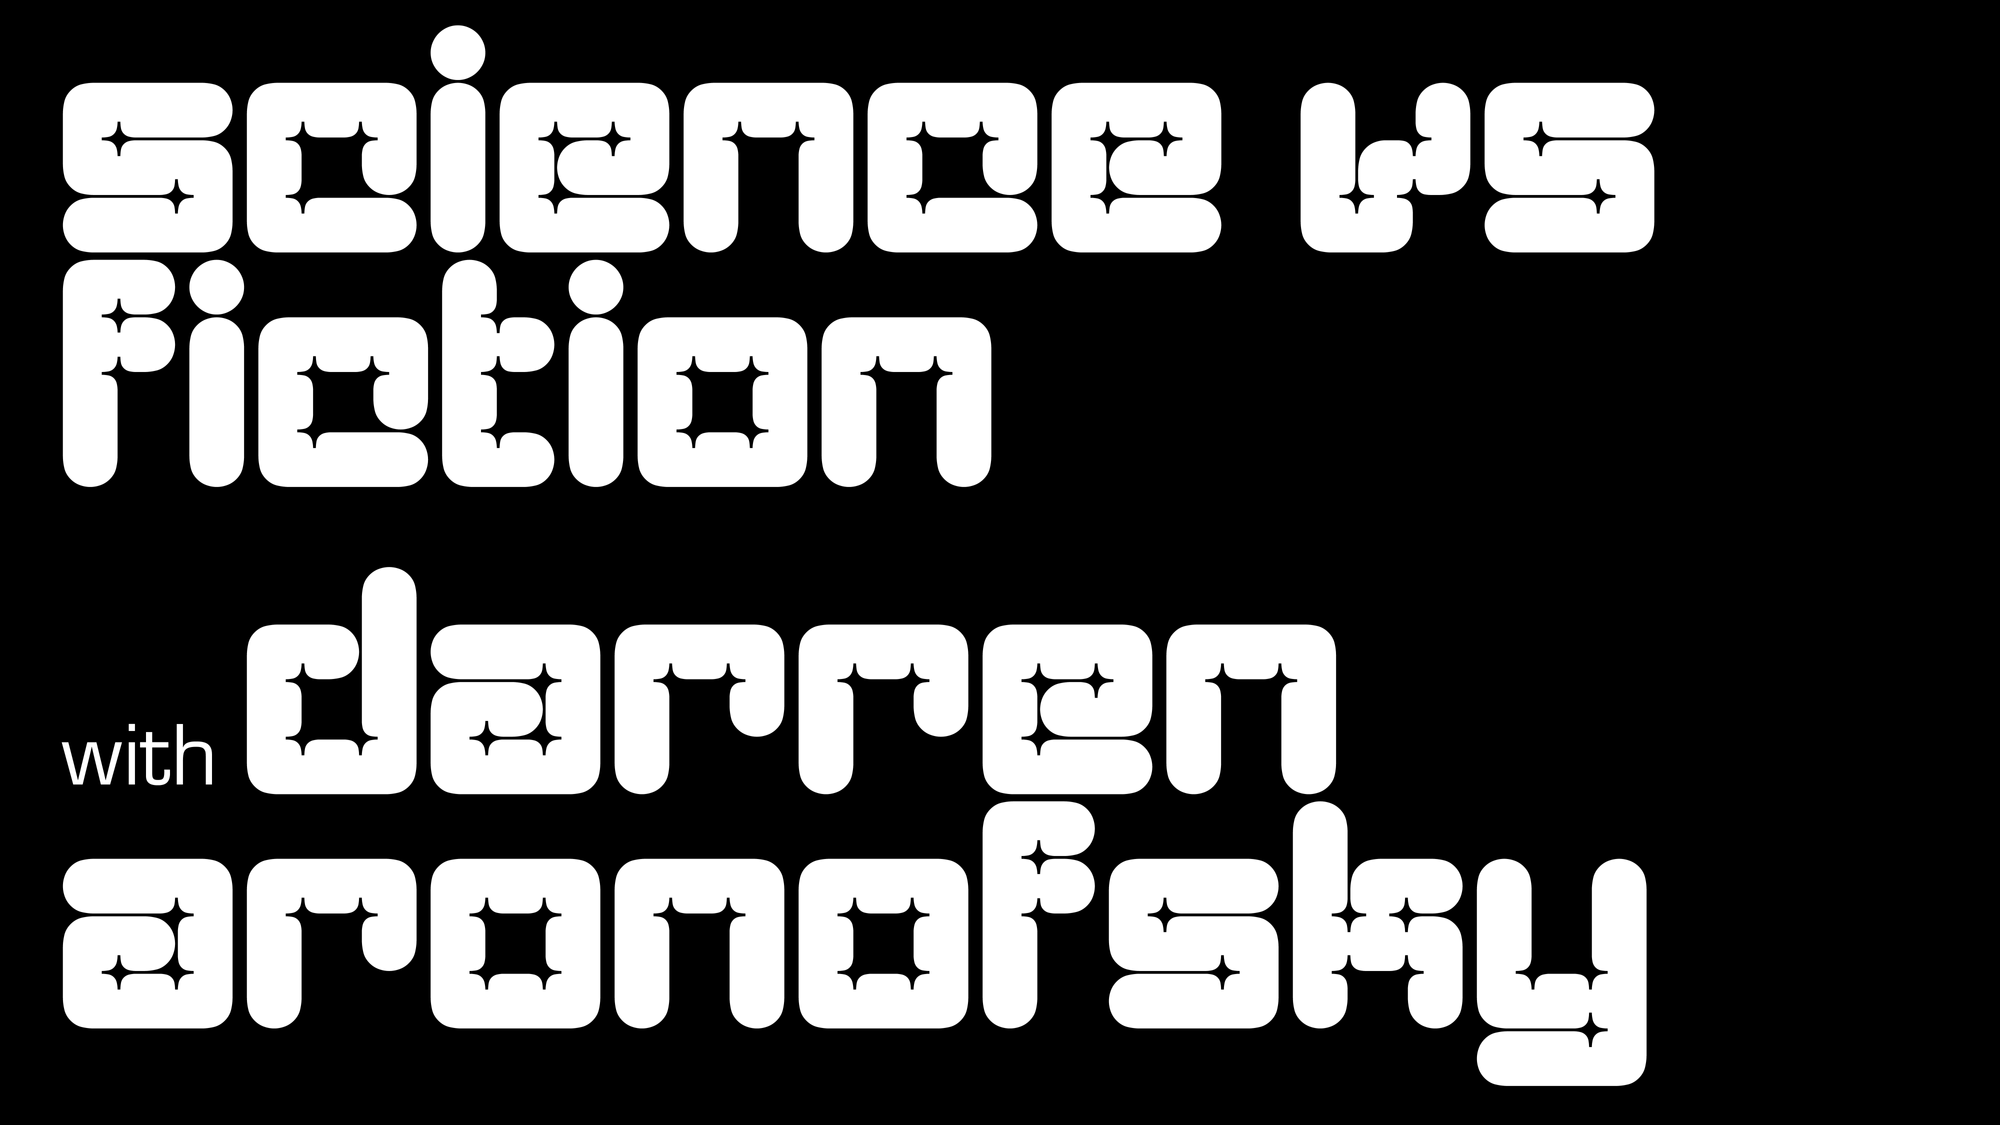 Black and white image that says "Science vs Fiction with Darren Aronofsky"